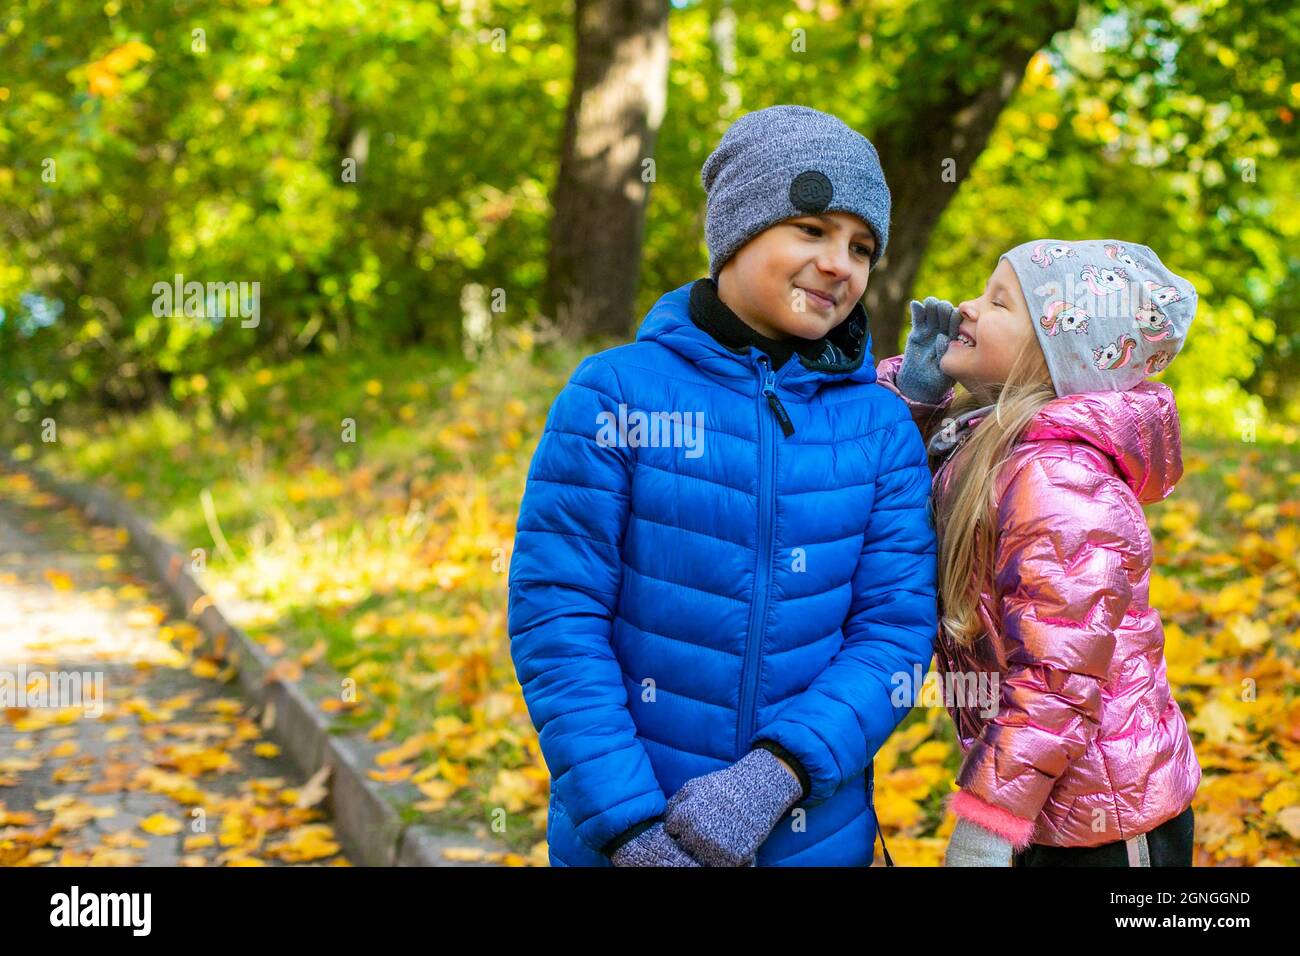 A boy and a girl are talking and smiling Stock Photo